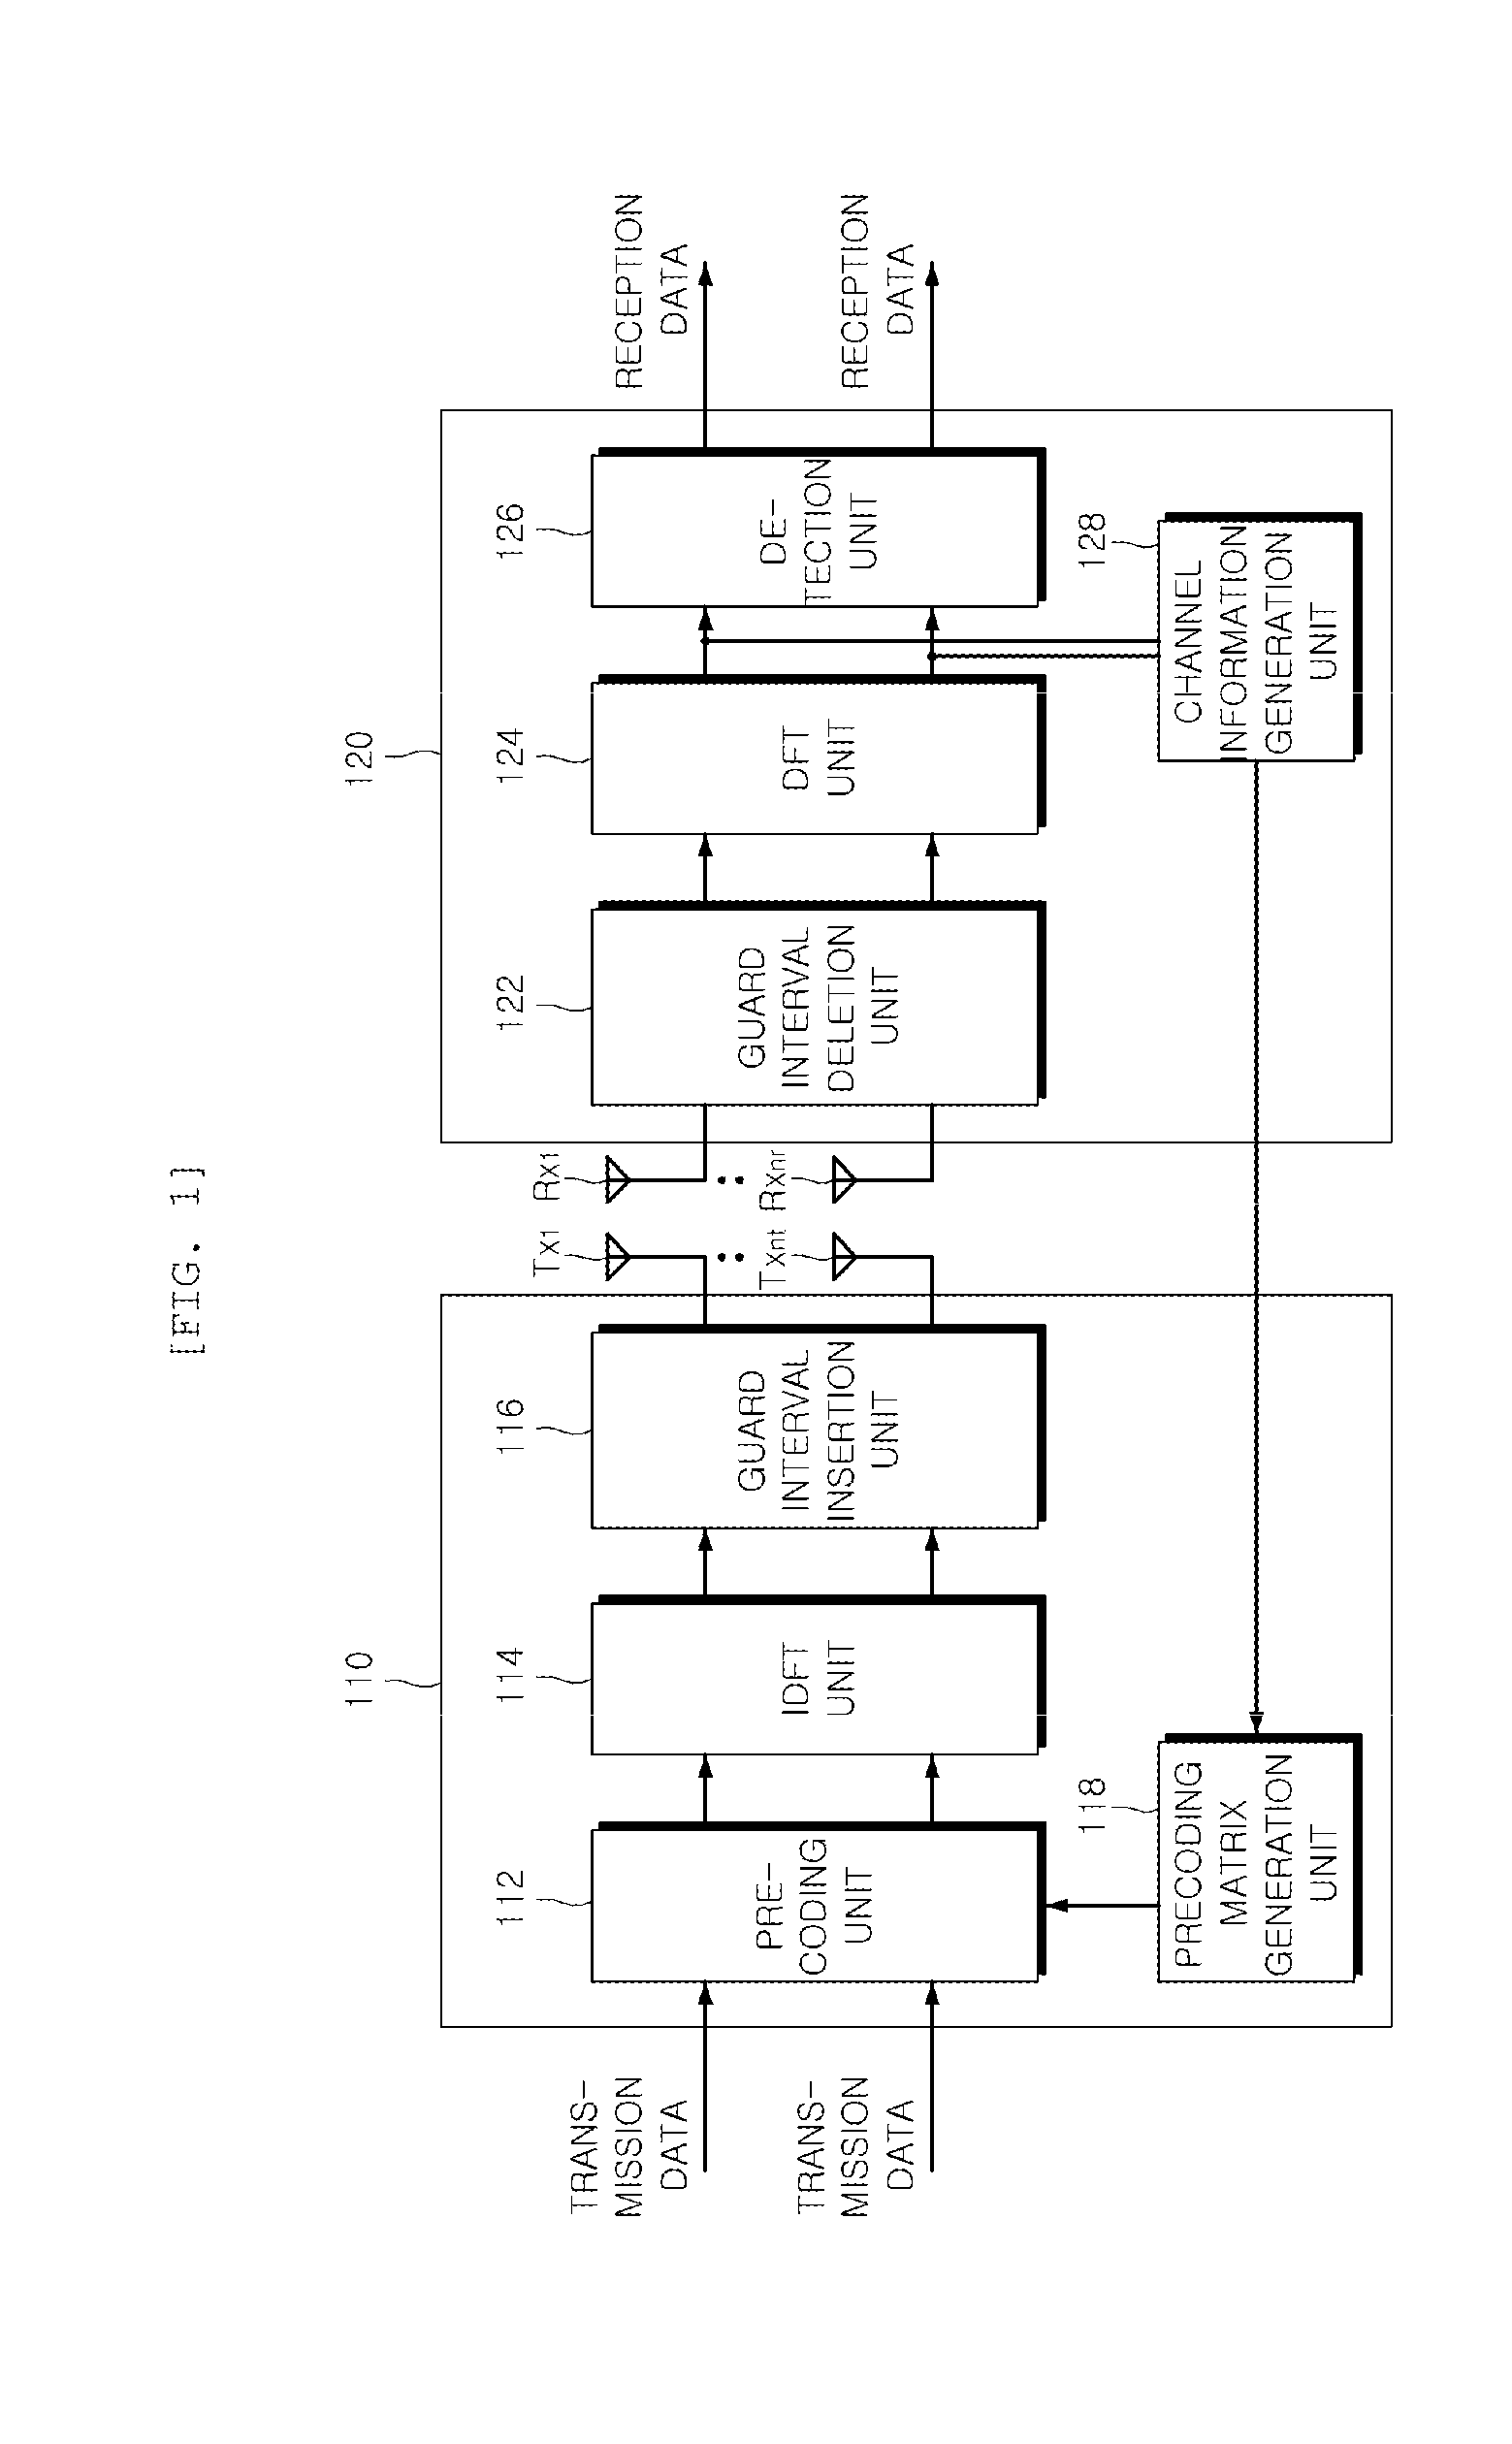 Channel information generating device and method for spatial division multiplexing algorithm in a wireless communication system, and data transmission apparatus and method adopting the same